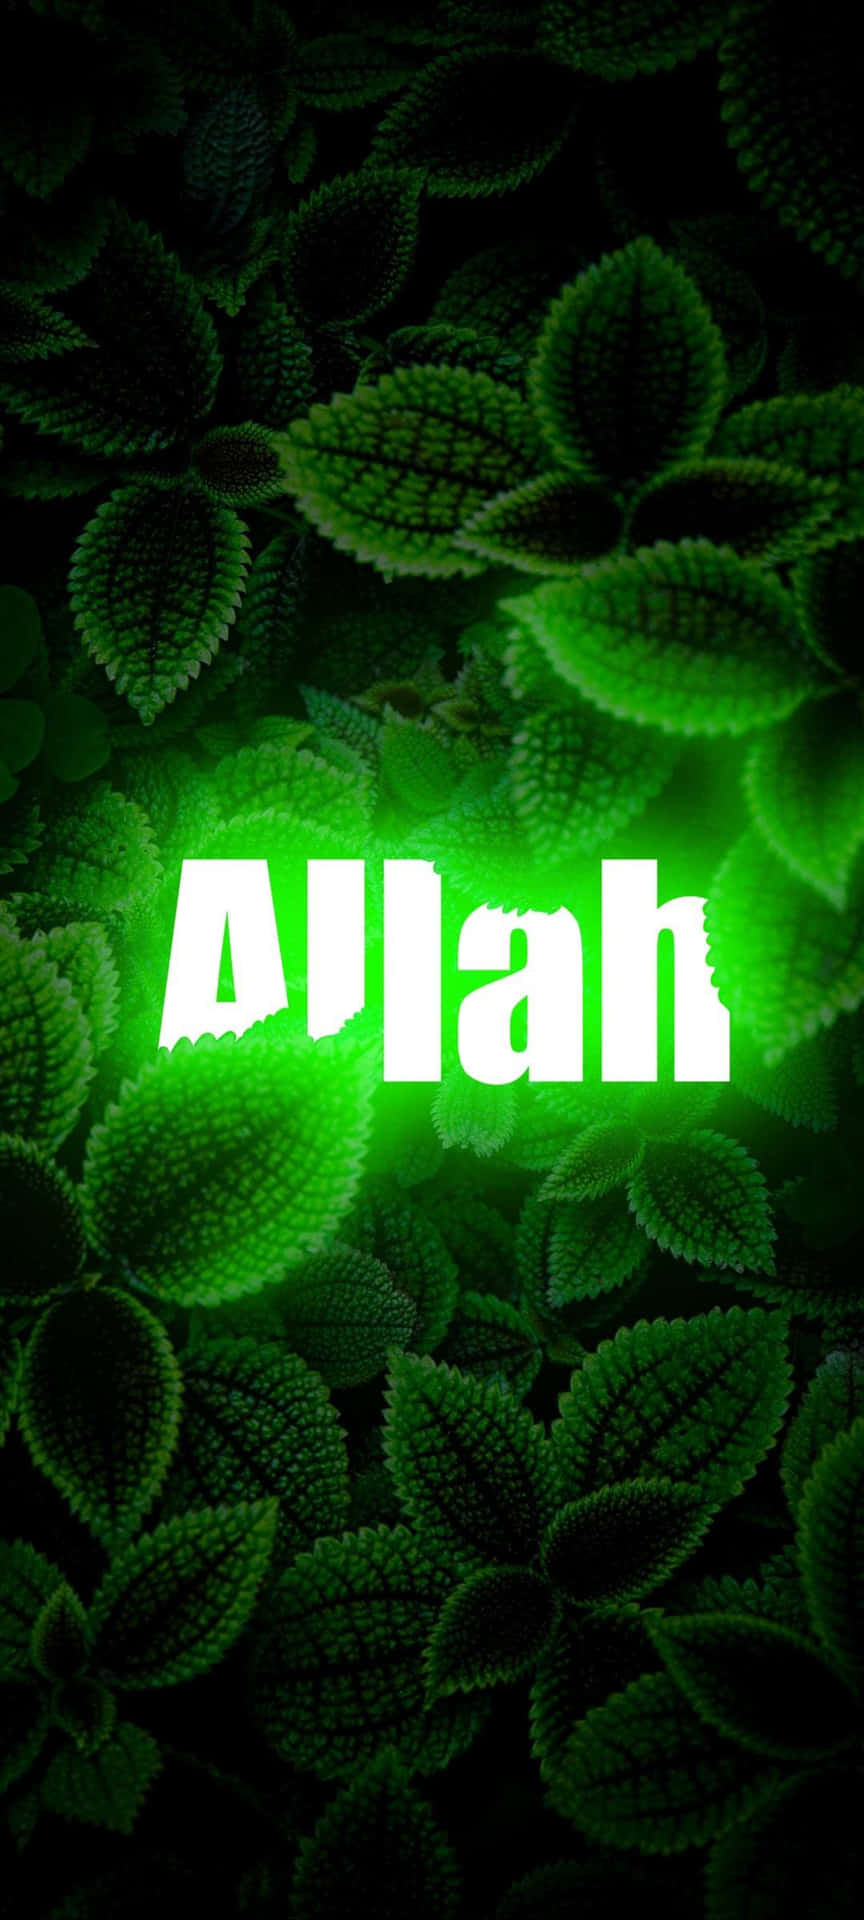 Allah is the Supreme Creator and Source of all life